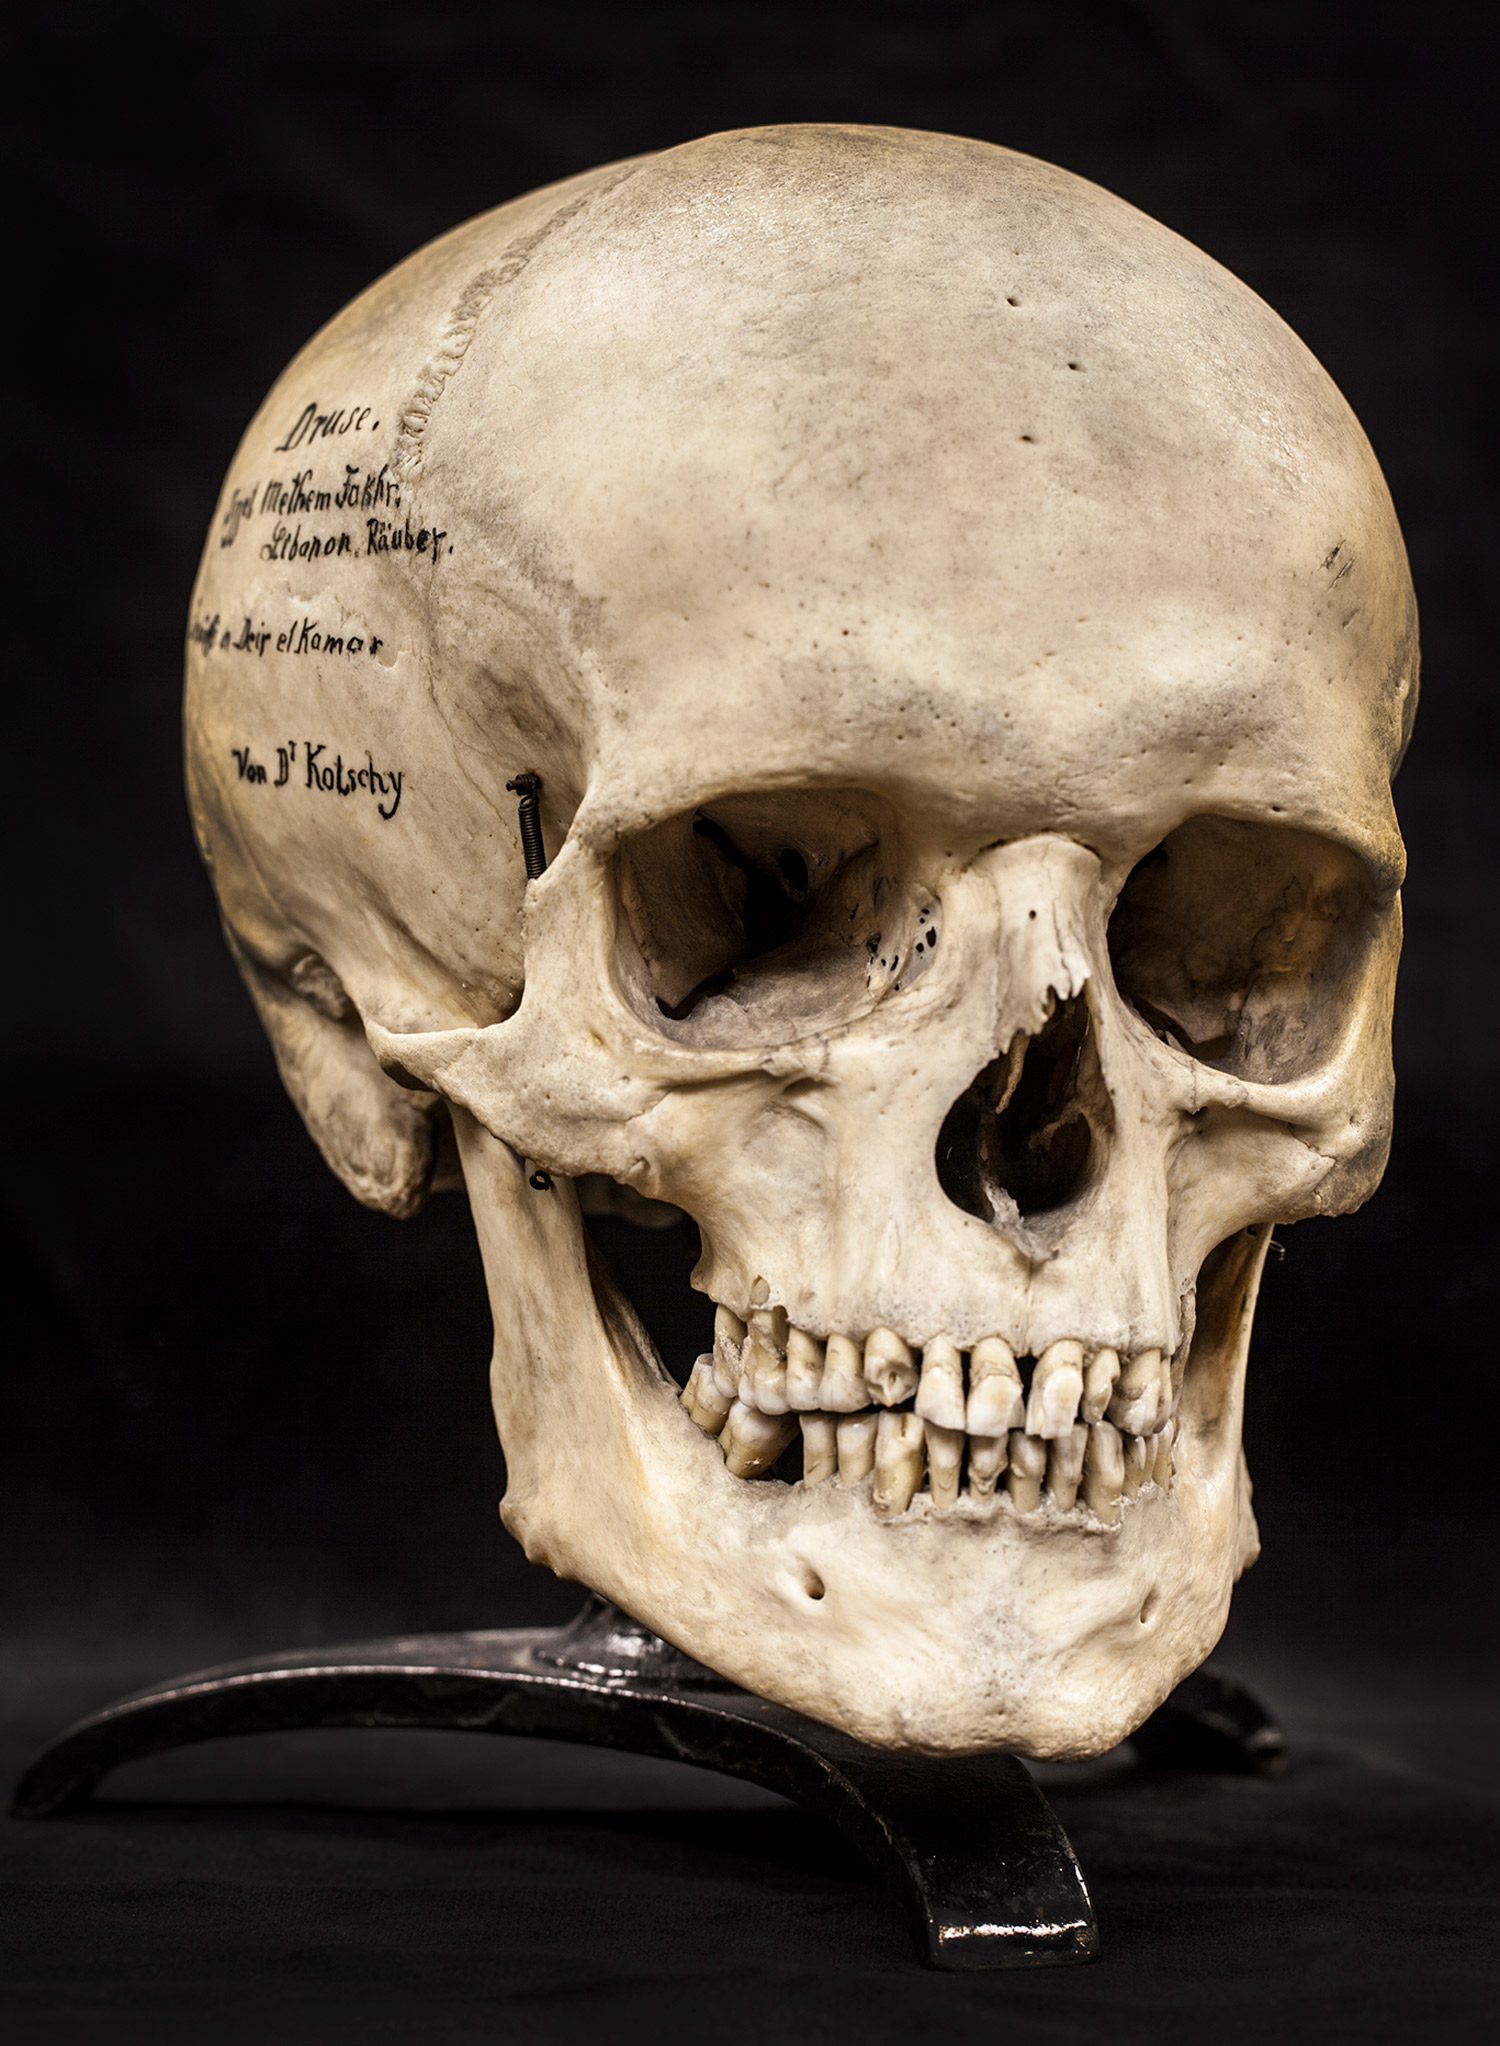 Christmas Gift Ideas: Human Skulls From the Mutter Museum | TIME.com